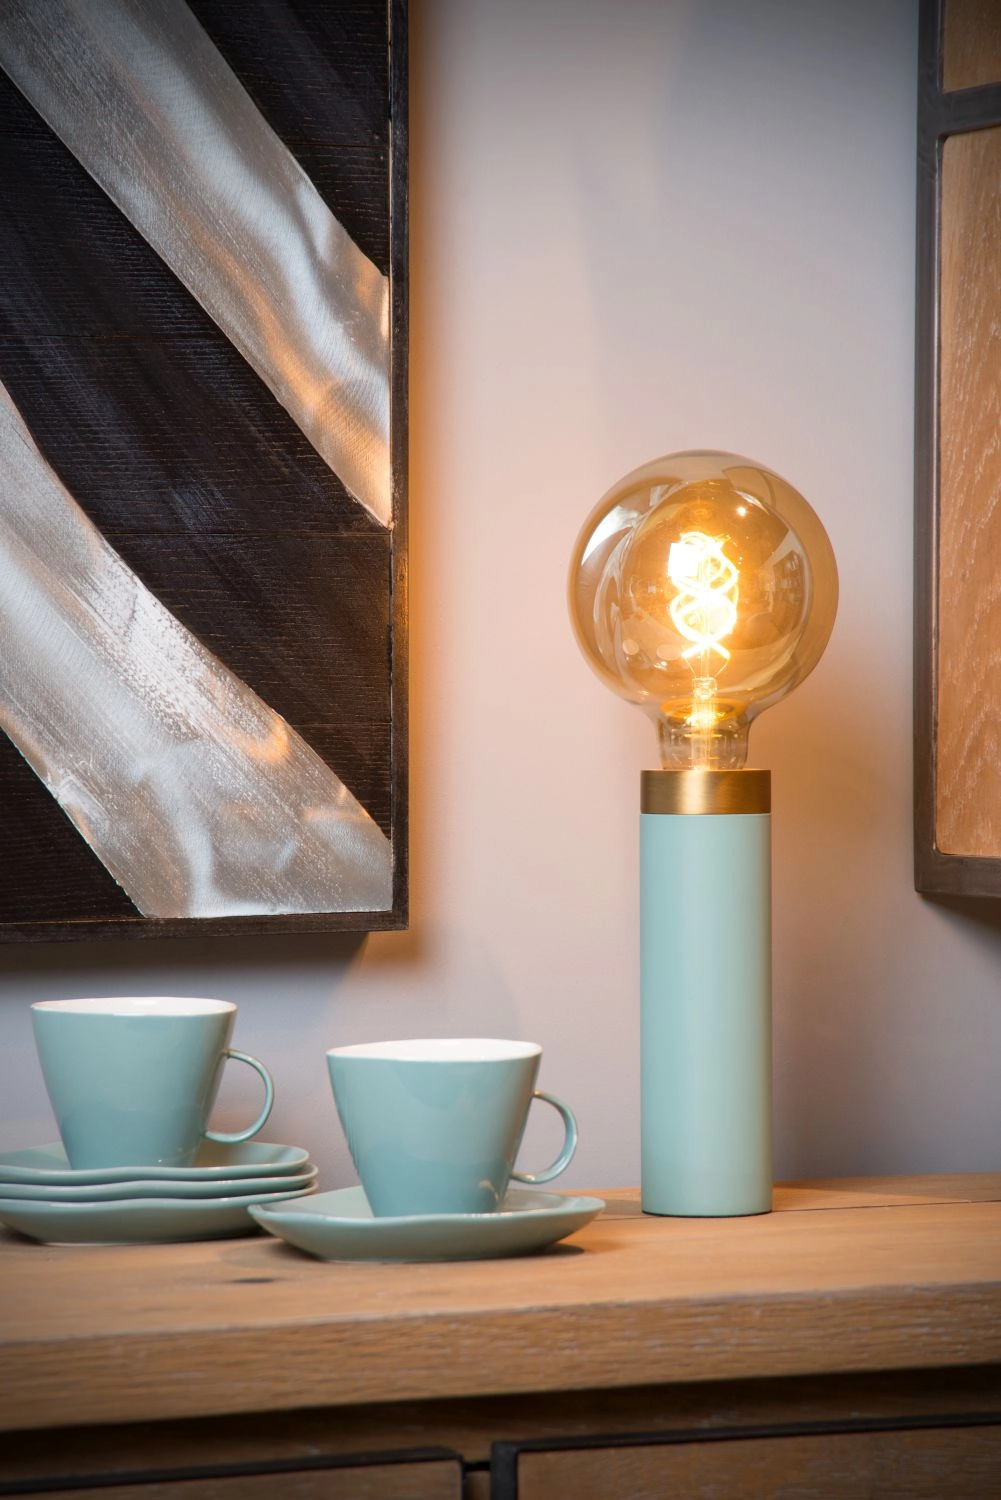 LU 03522/01/37 Lucide SELIN - Table lamp - Ø 6 cm - 1xE27 - Turquoise